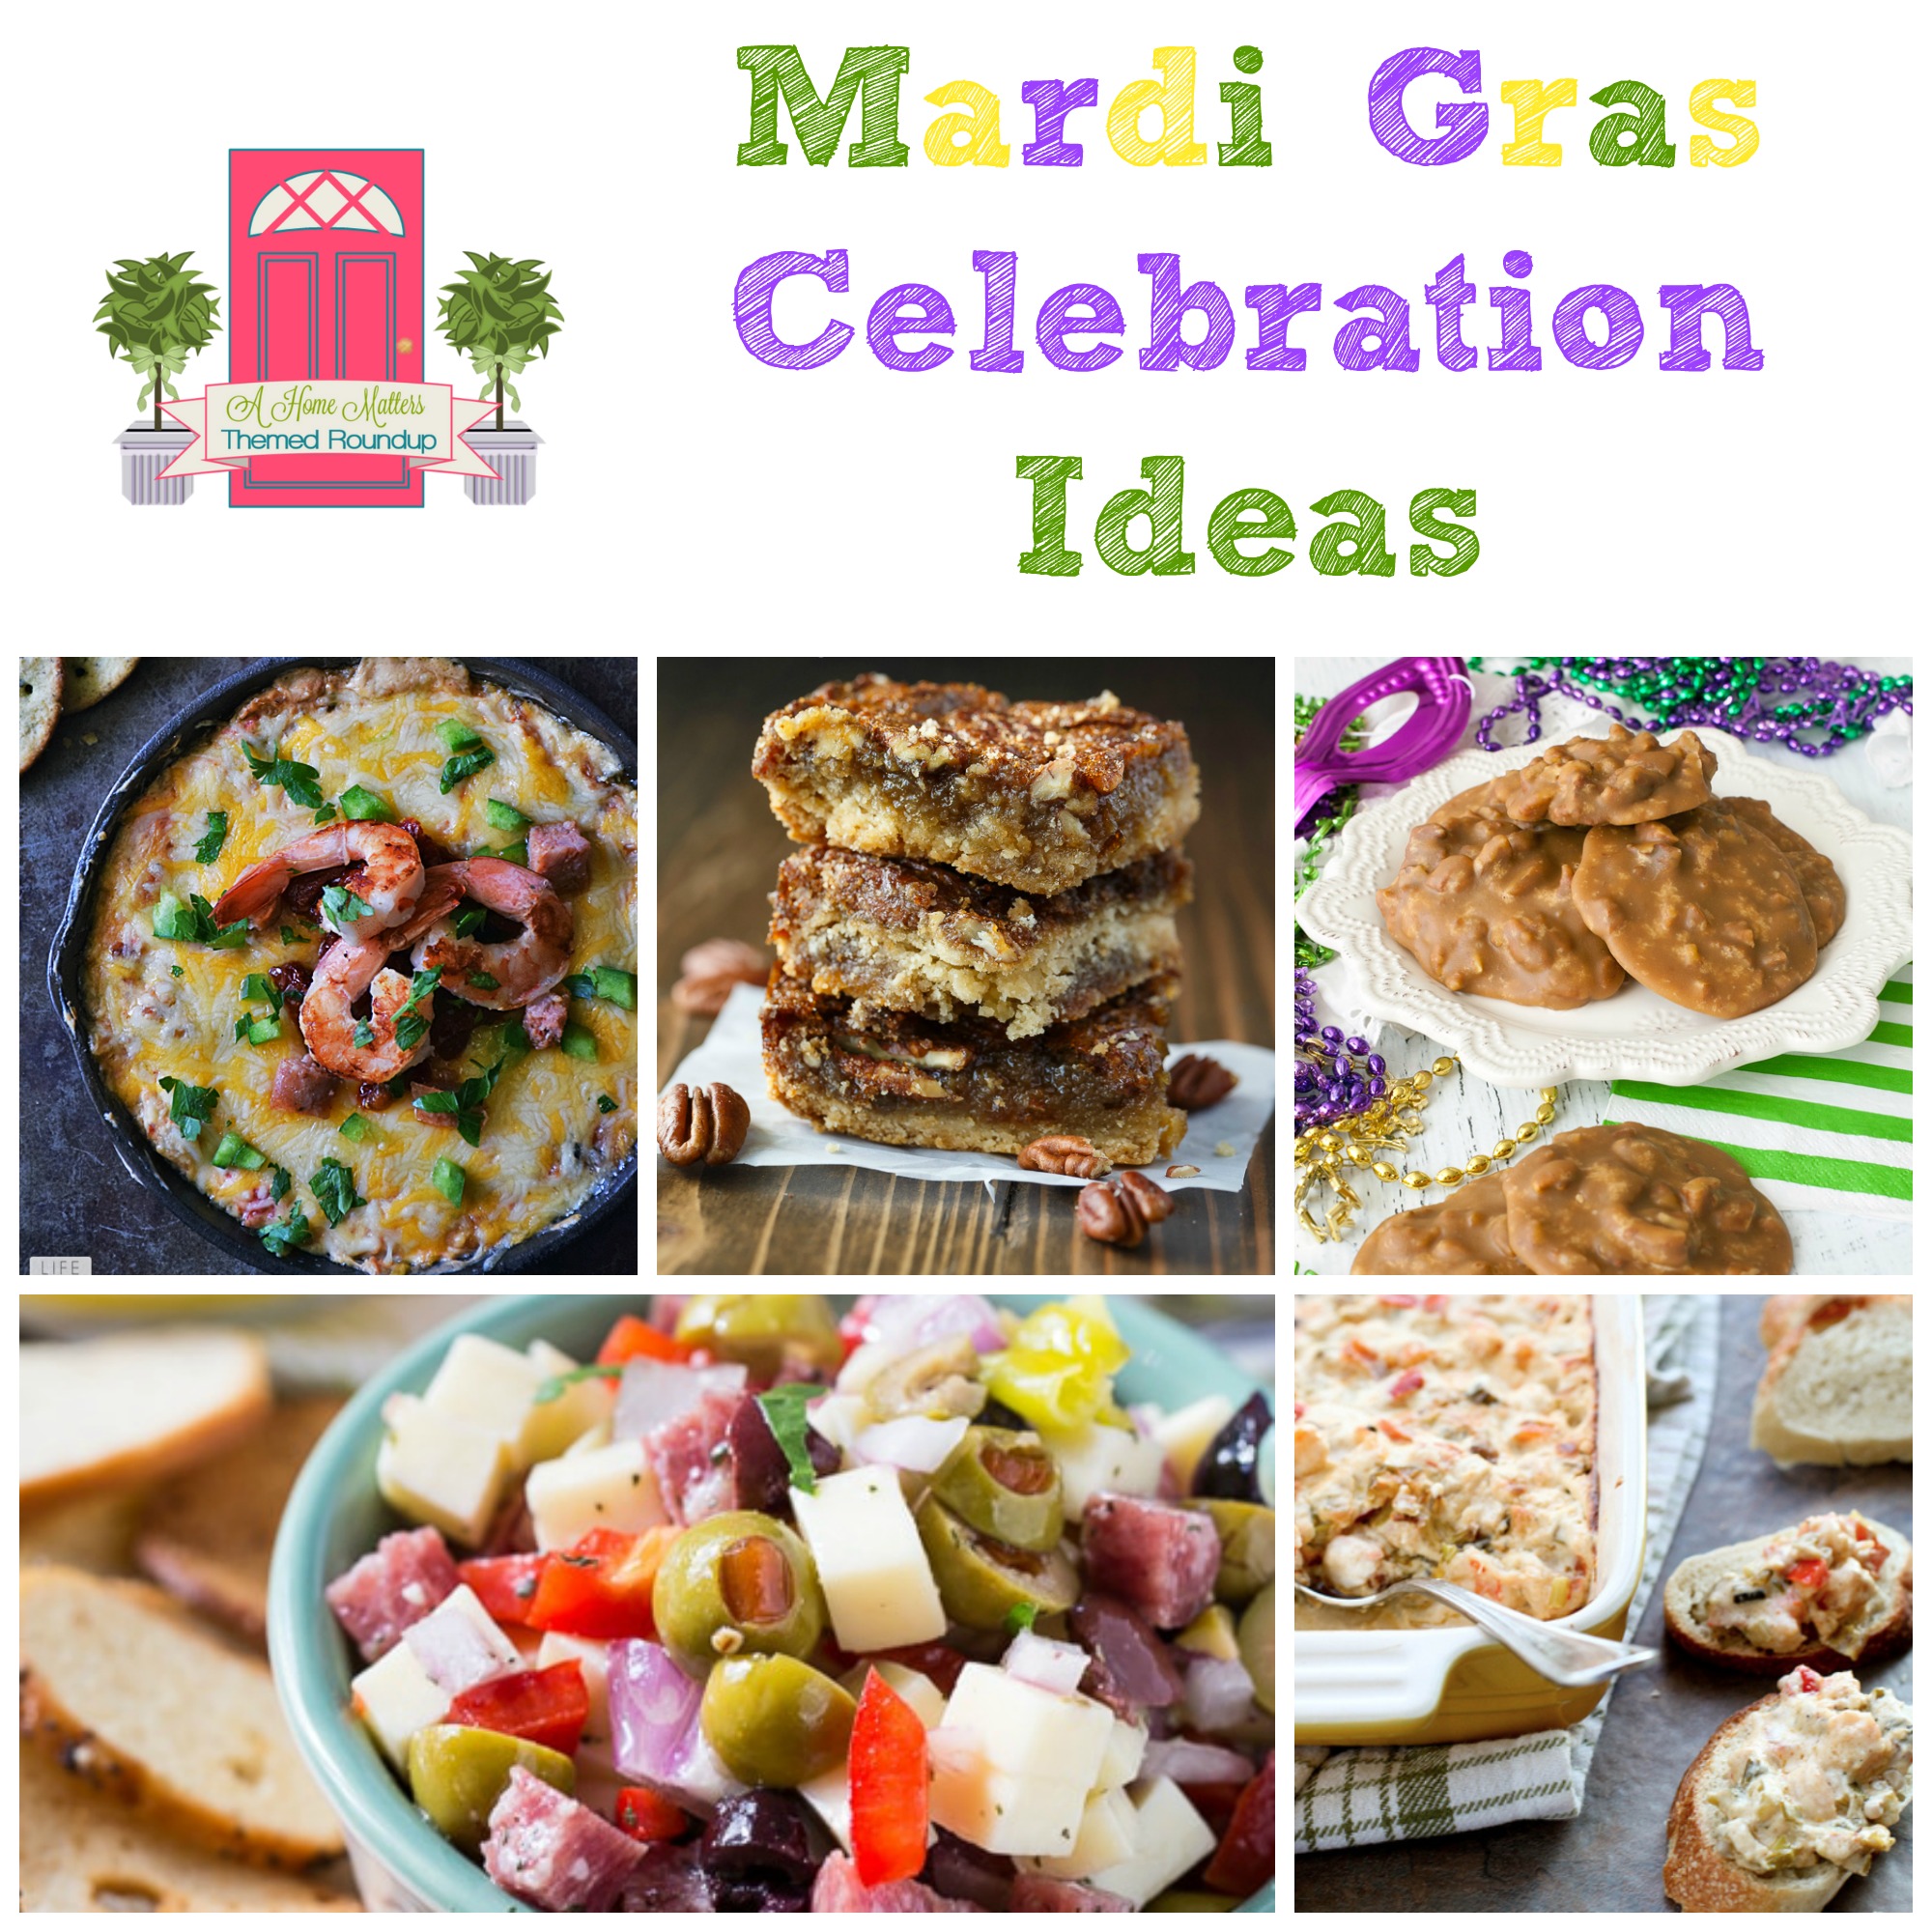 Join the celebration with fun and fabulous Mardi Gras ideas. Get your Fat Tuesday on! Plus link up at Home Matters with recipes, DIY, crafts, decor.